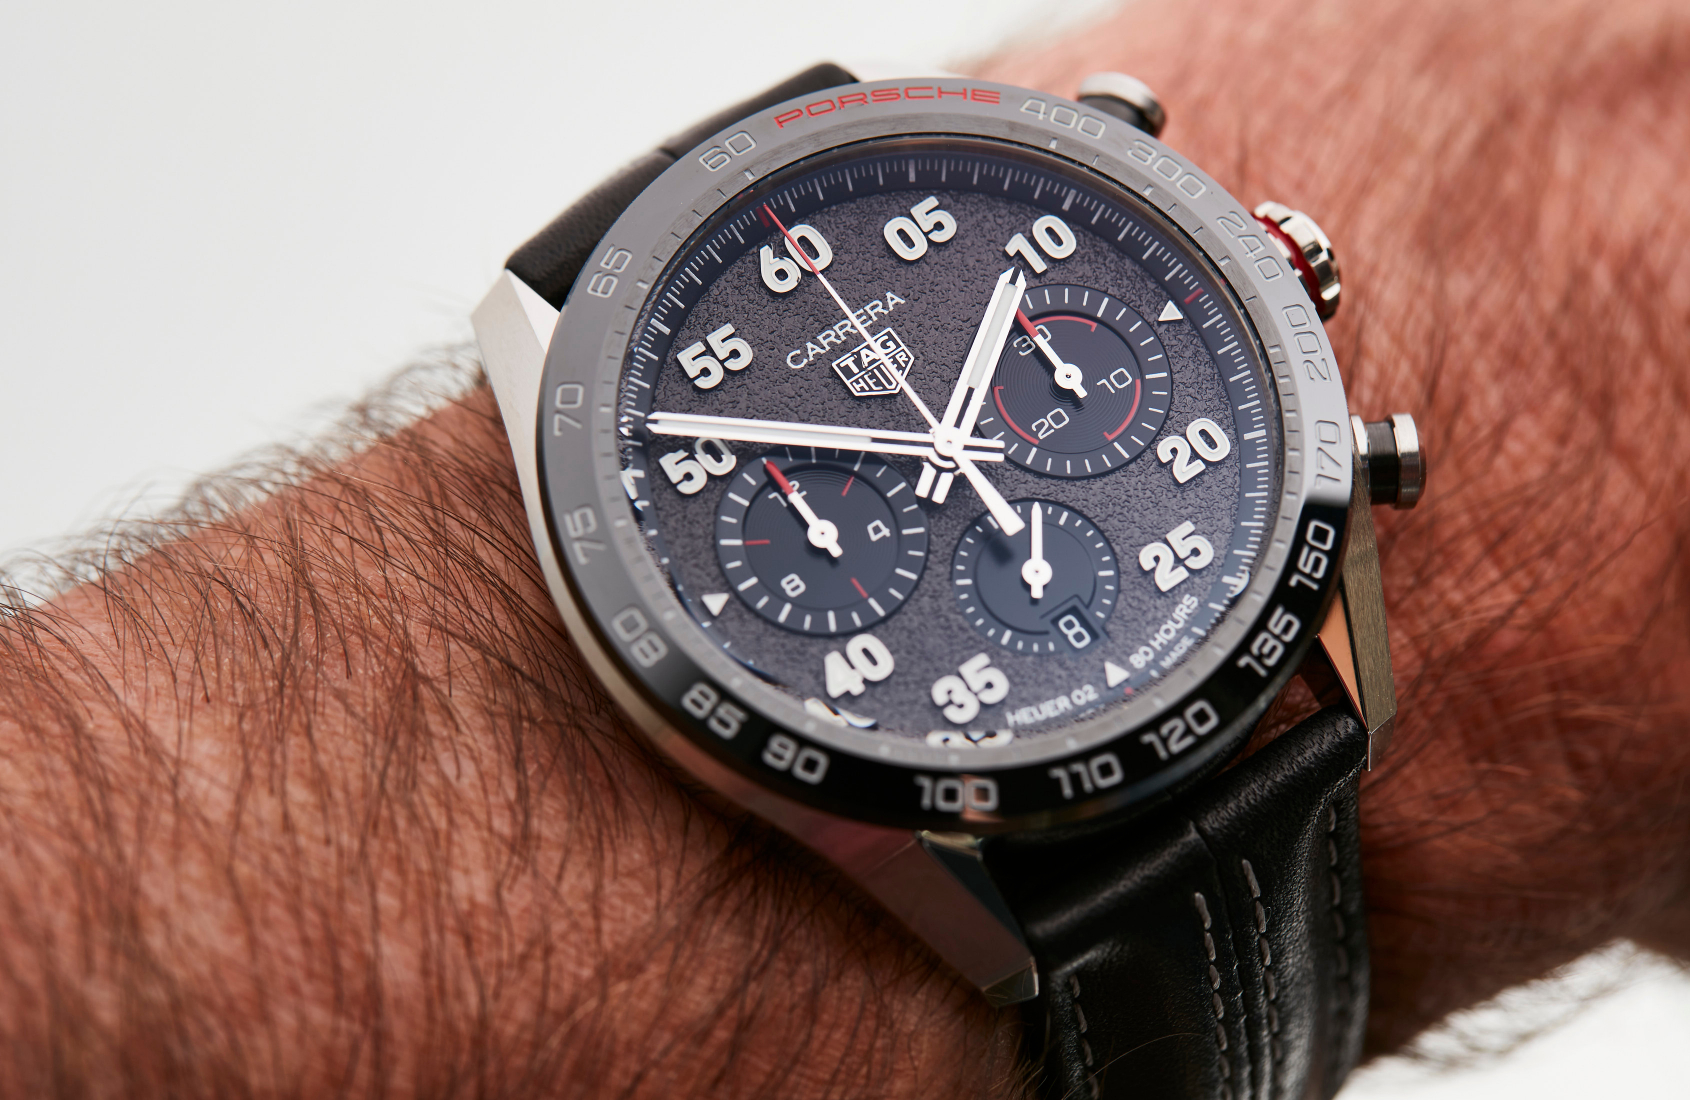 HANDS-ON: The TAG Heuer Carrera Porsche Chronograph says it's time to